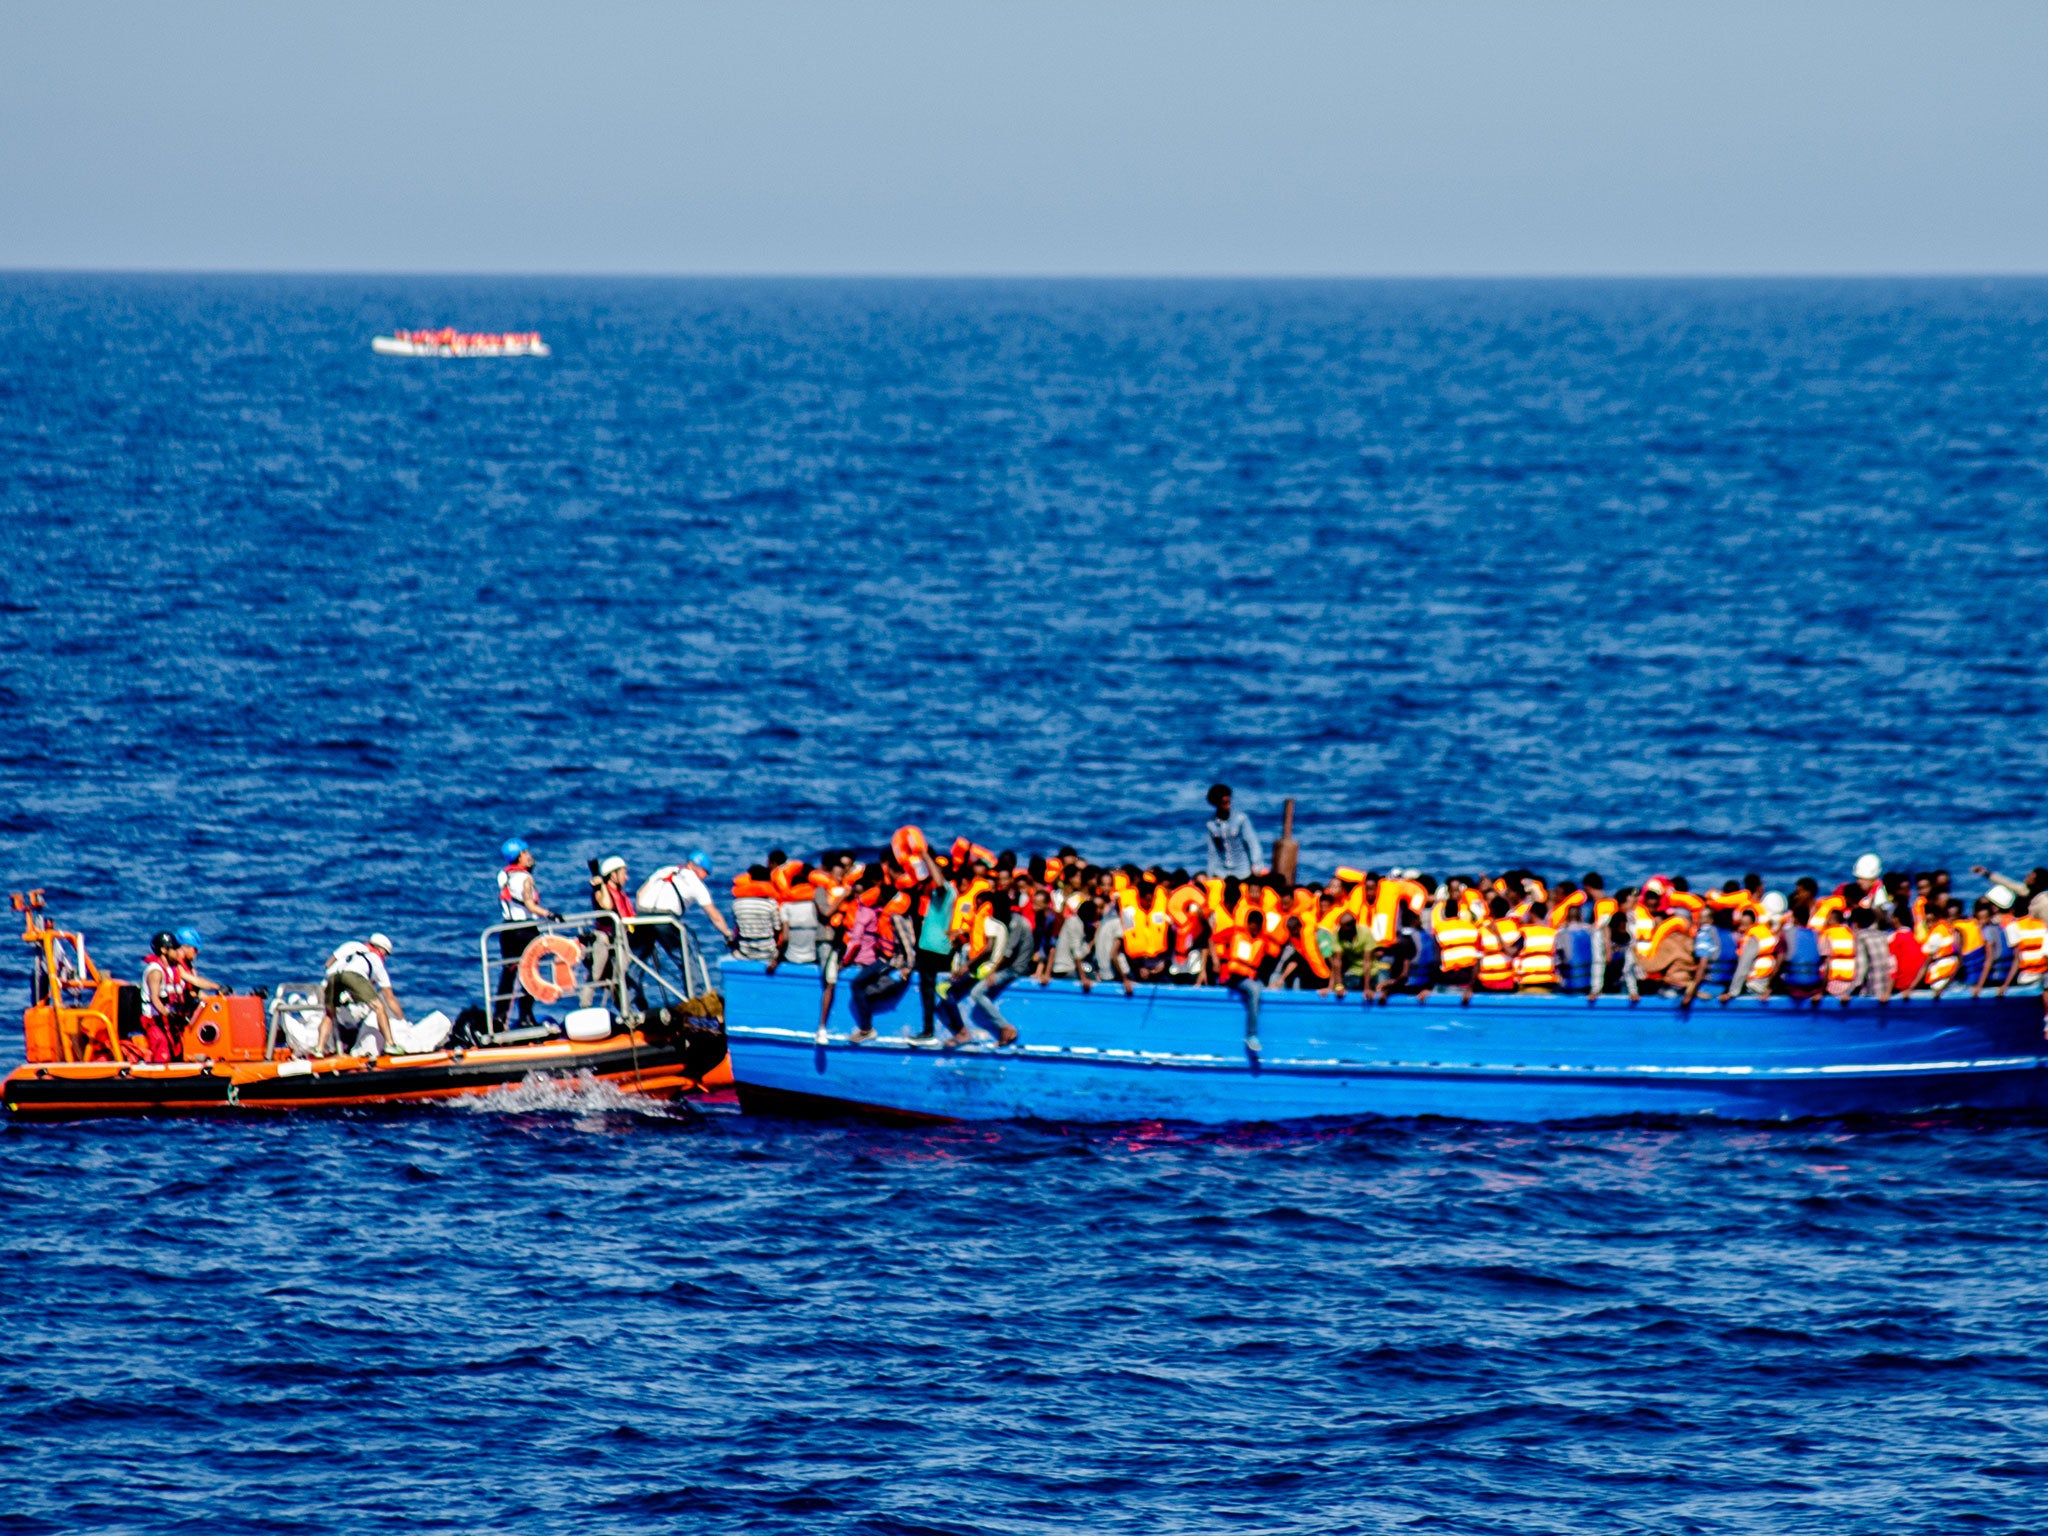 Wooden boats like this one carrying 400 people hold more passengers and can capsize more easily